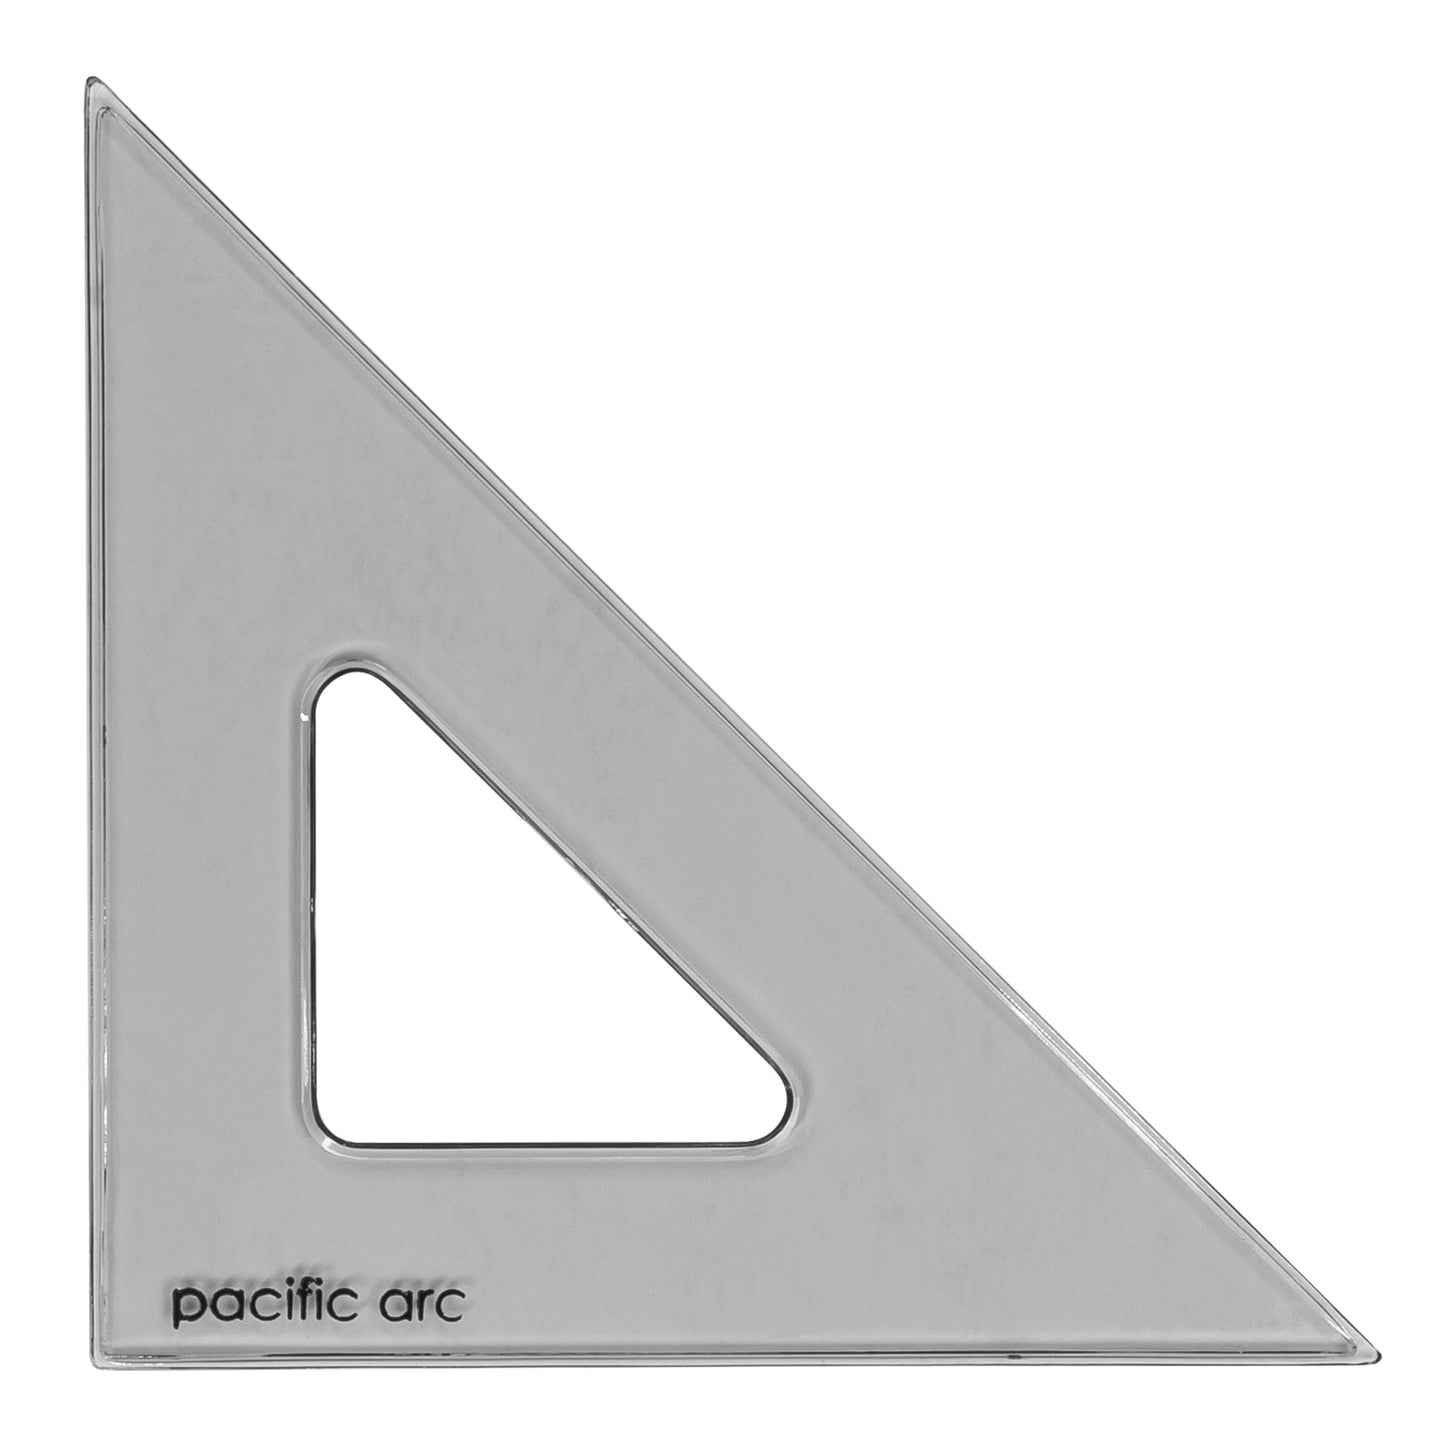 PACIFIC ARC Set Square Pacific Arc - Smoke-Tint Acrylic Triangle - 10"/25.4cm - 45/90 Degrees - Item #STS450-10